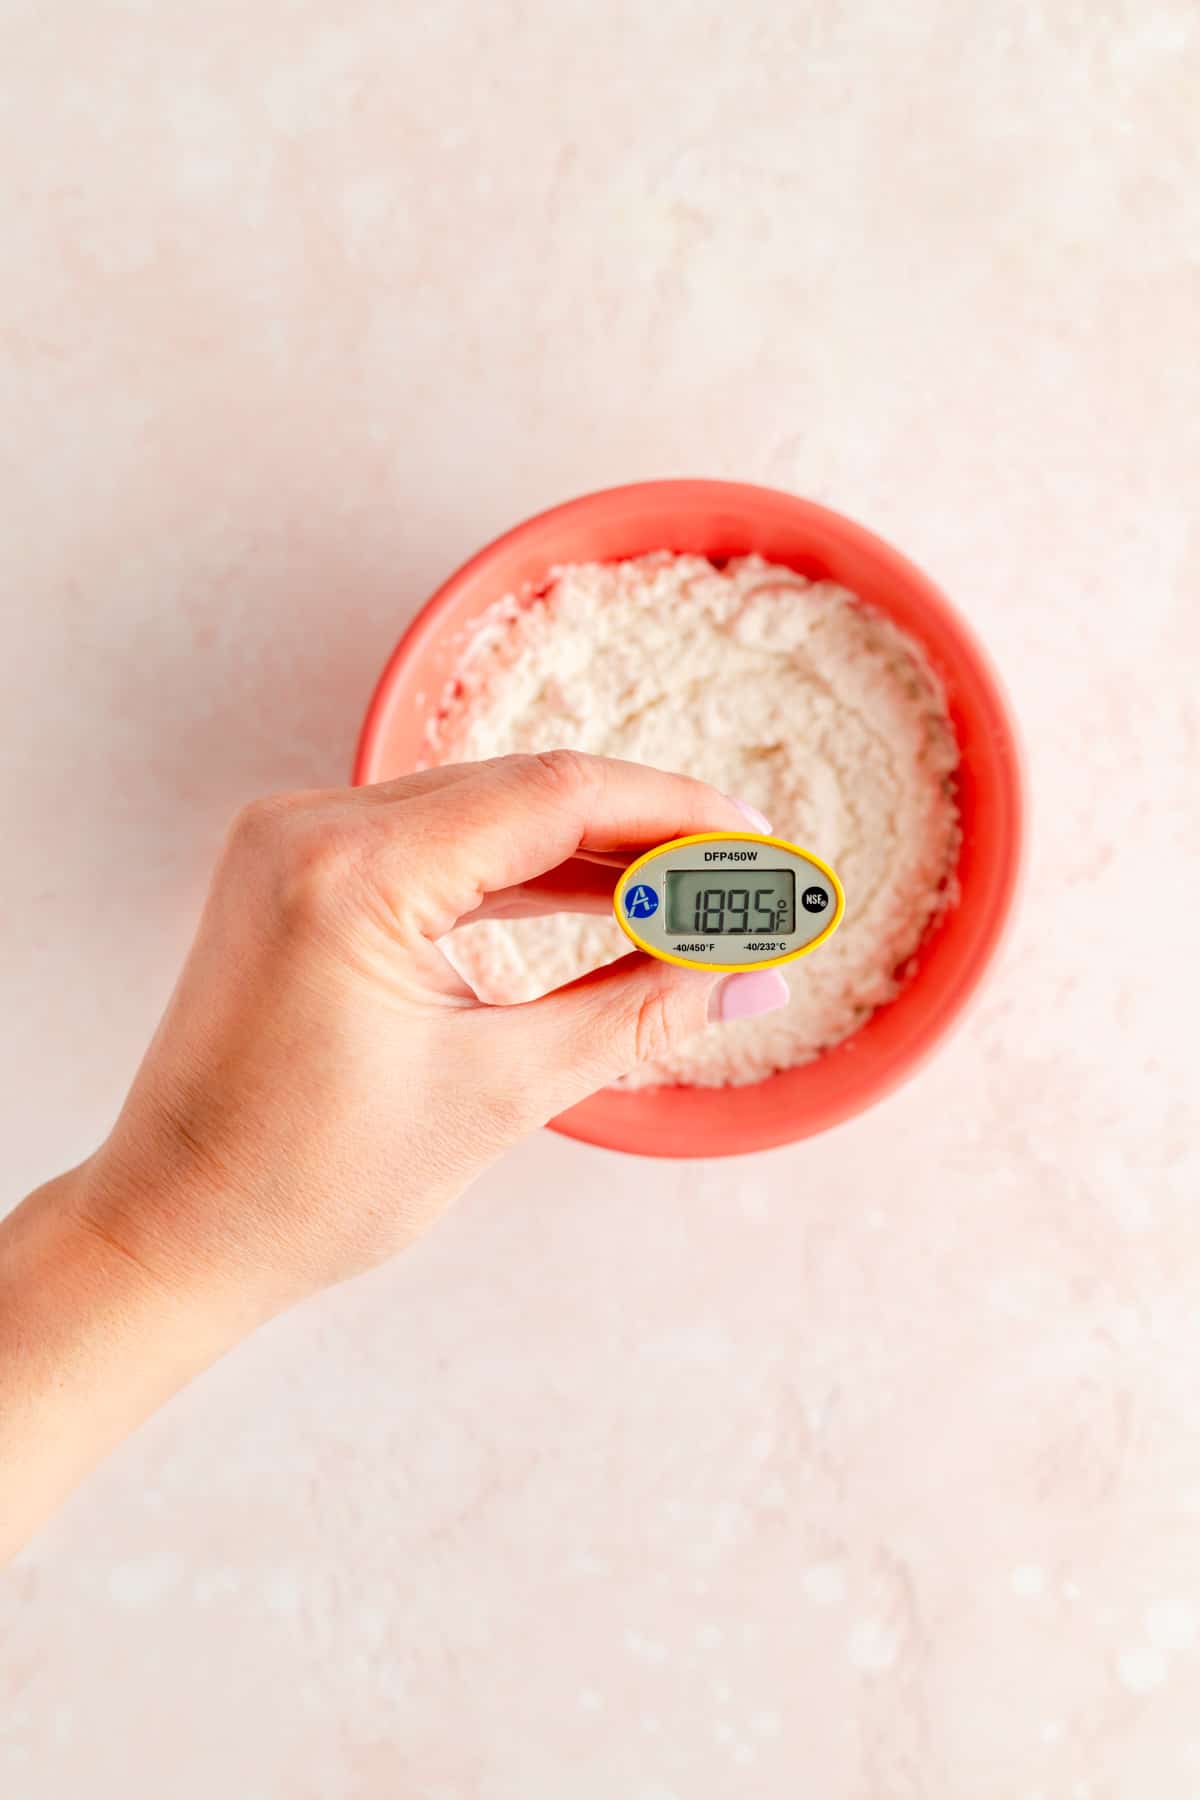 Hand holding thermometer reading 189.5 in pink bowl filled with flour.